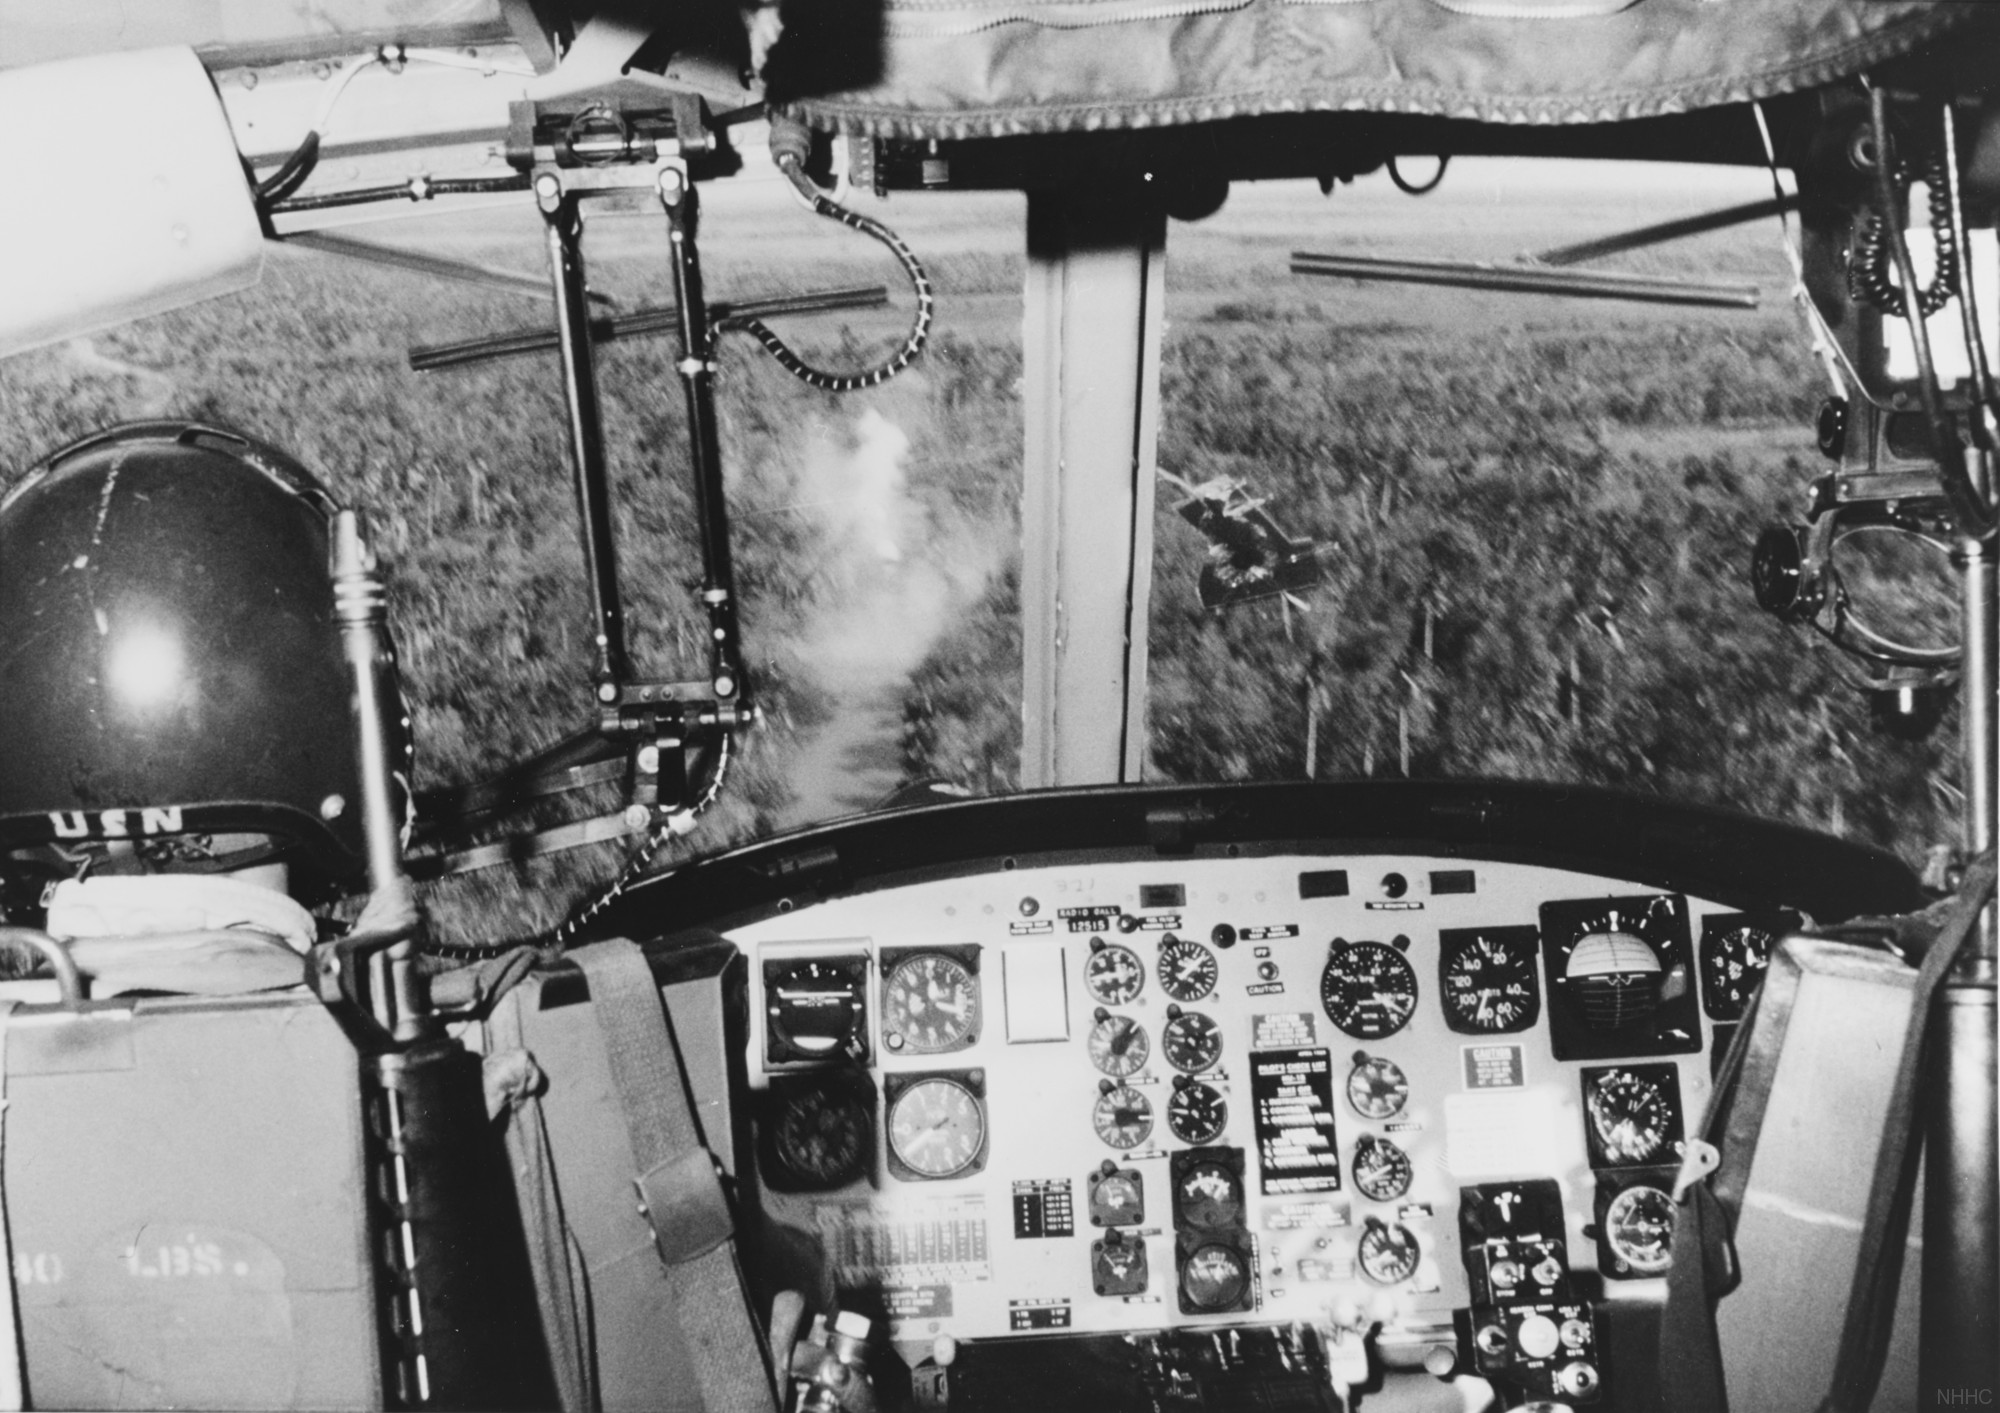 hal-3 seawolves helicopter attack squadron light us navy uh-1 huey iroquois 18 vietnam war cockpit